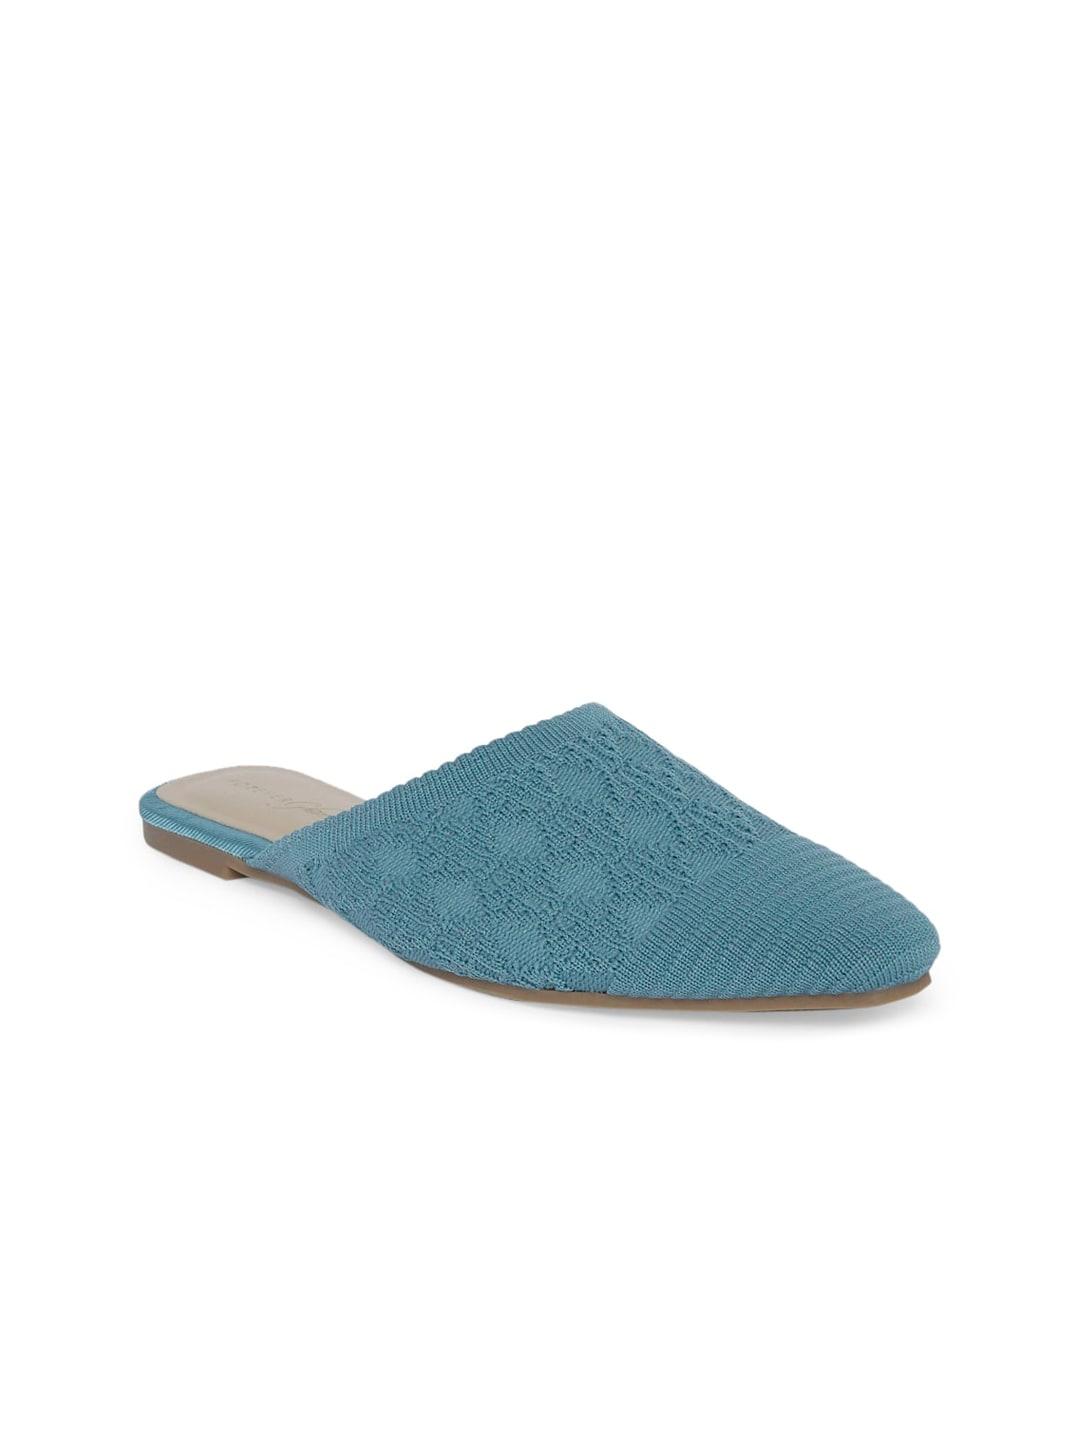 Forever Glam by Pantaloons Women Blue Mules Flats